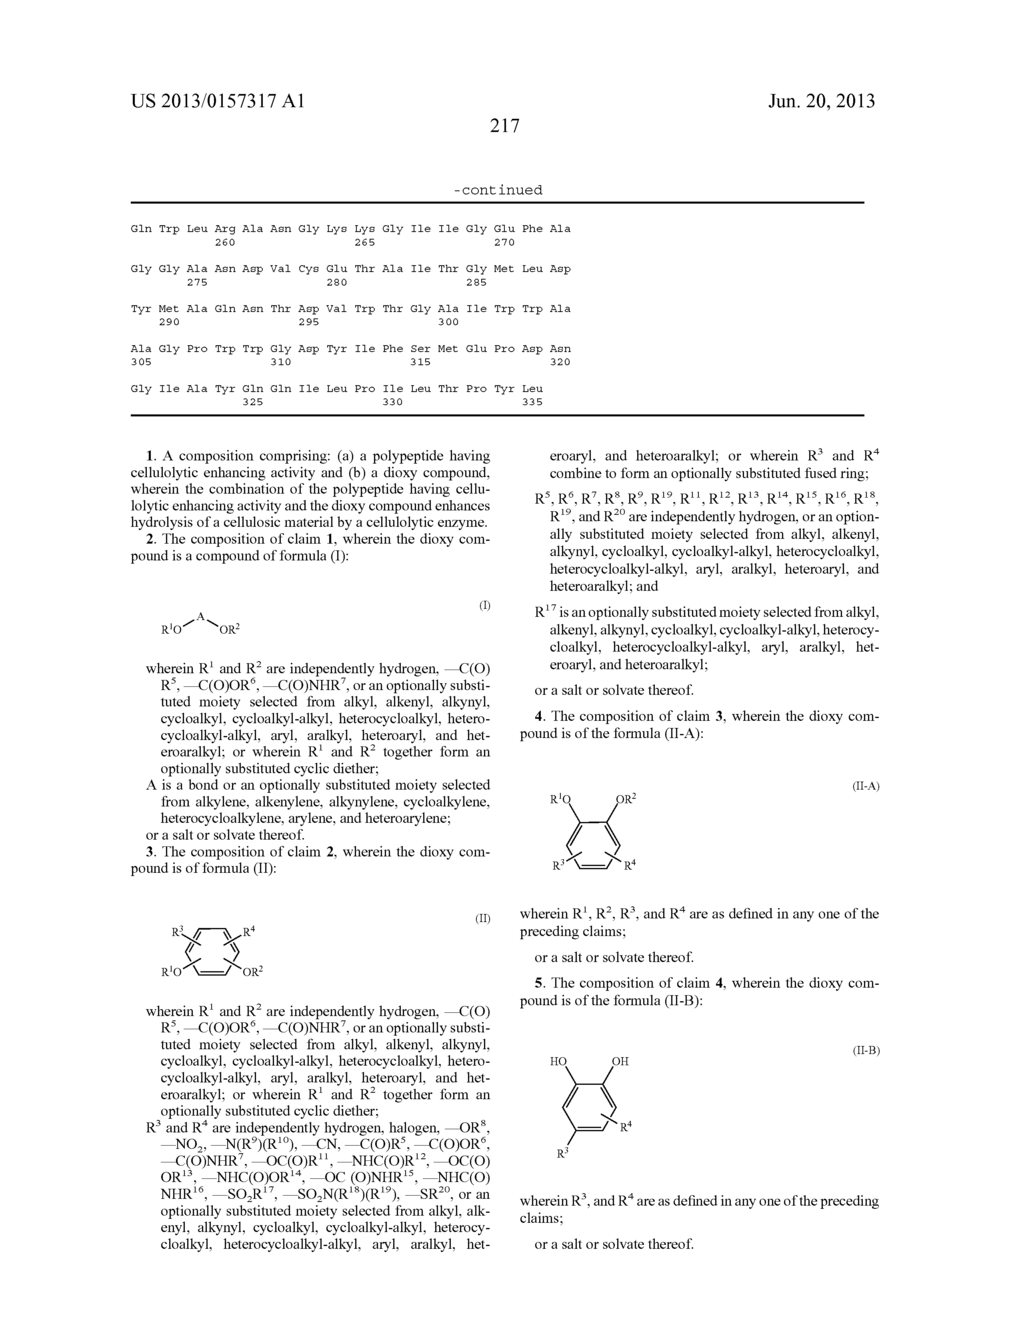 Compositions Comprising A Polypeptide Having Cellulolytic Enhancing     Activity And A Dioxy Compound And Uses Thereof - diagram, schematic, and image 254